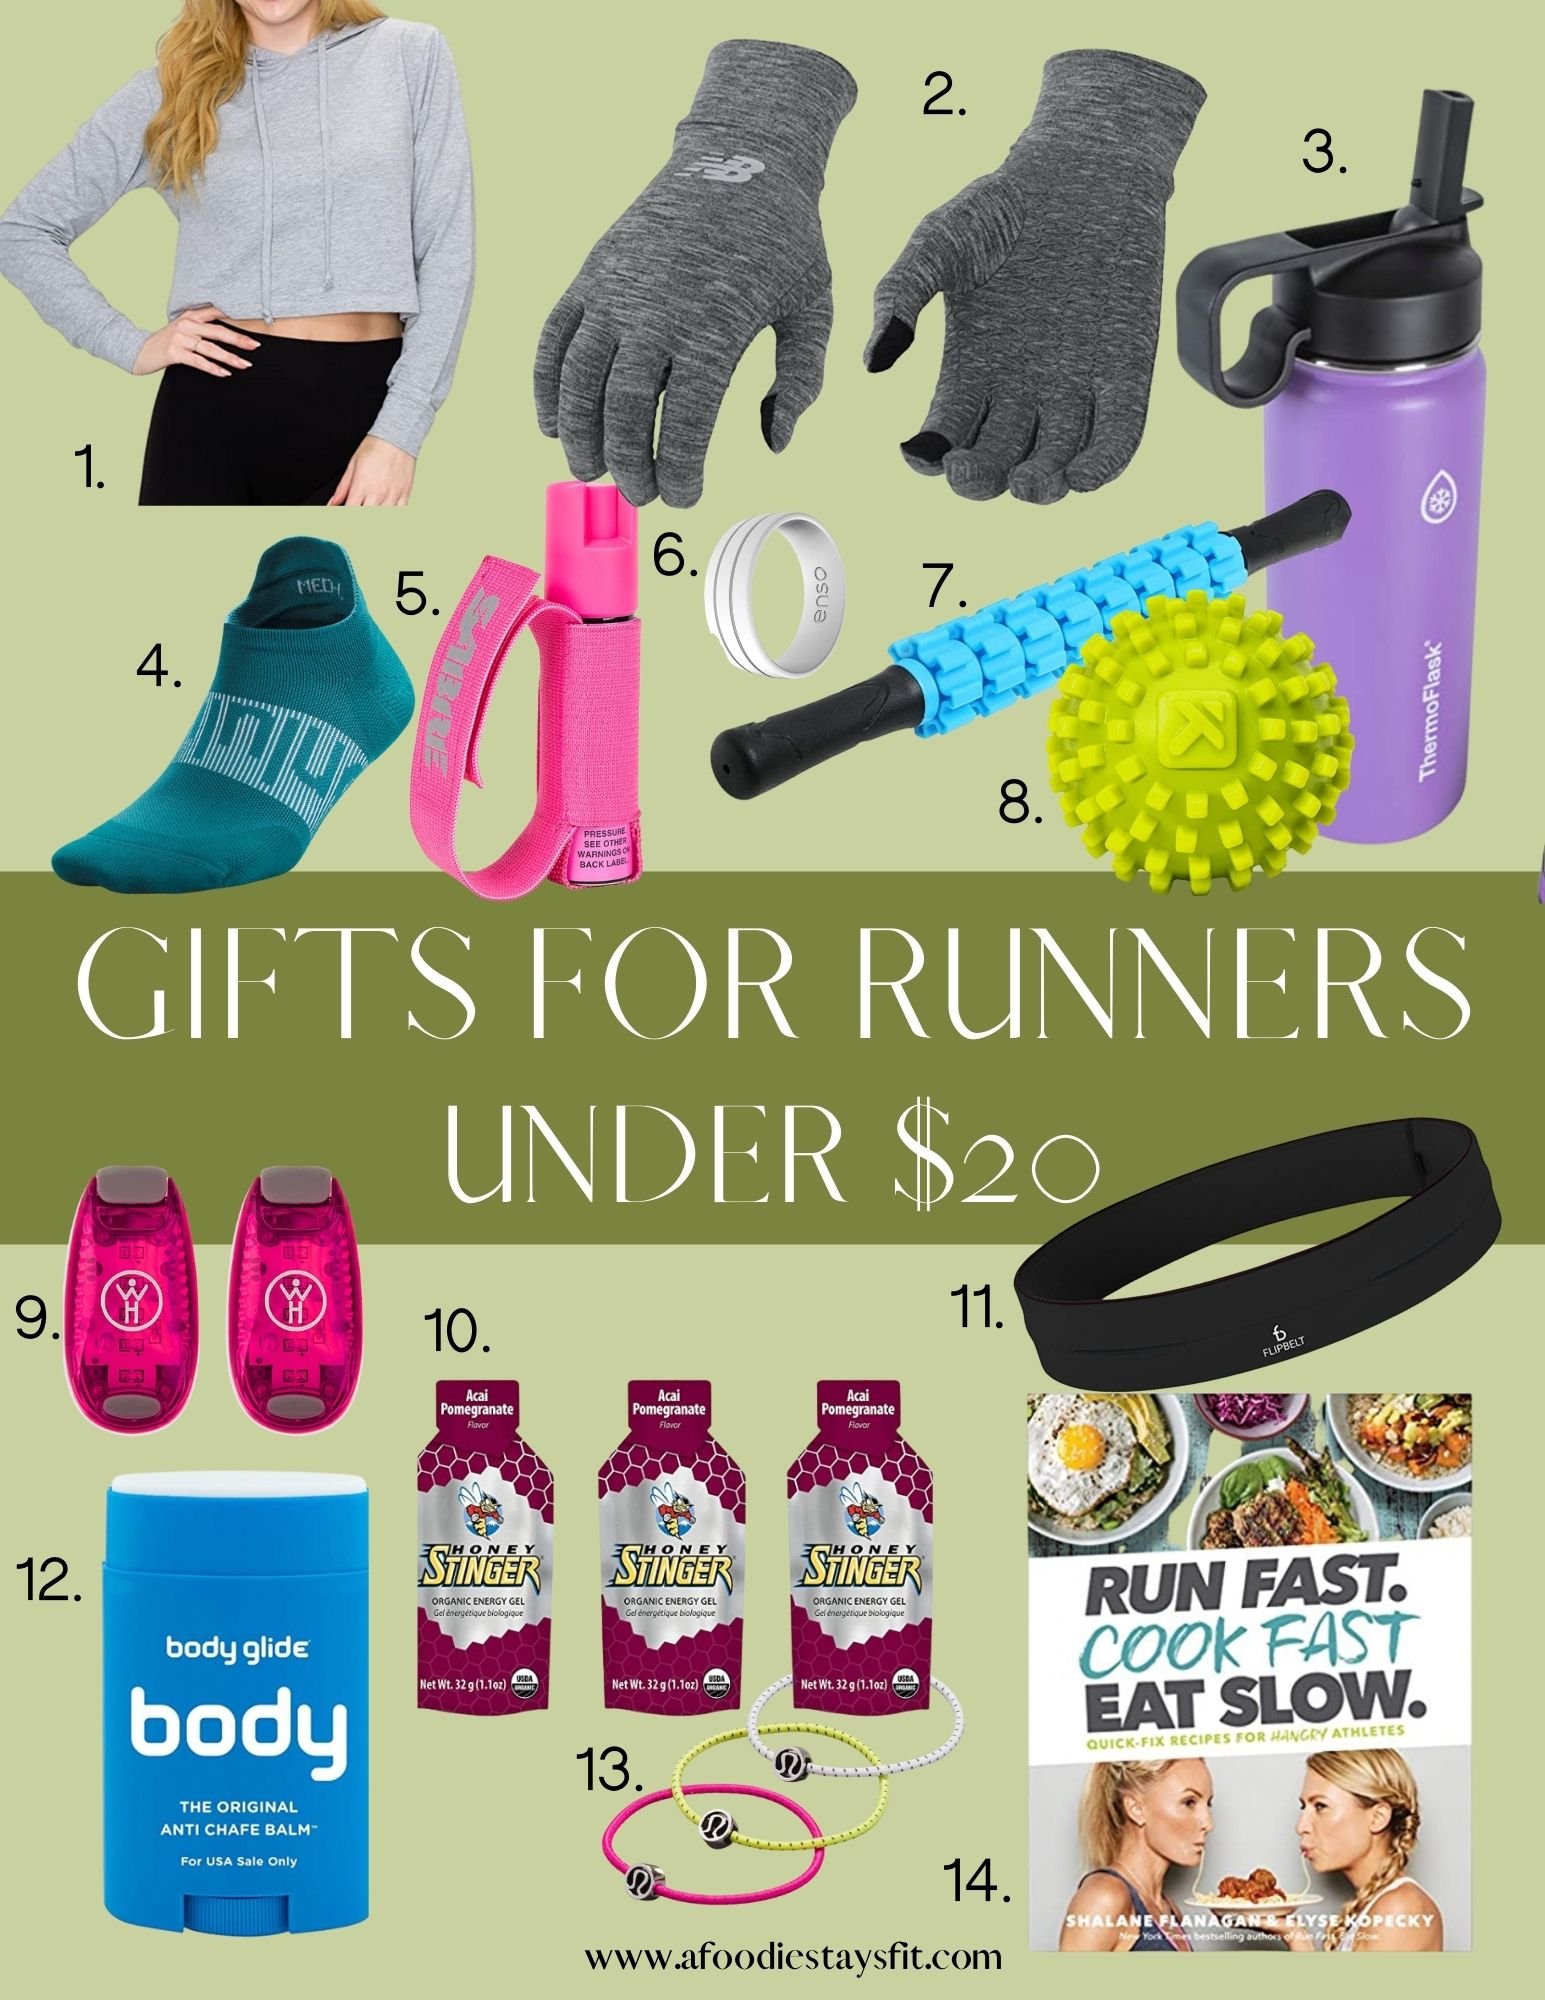 Gifts for Runners under $20 - 2021 Gift Guides